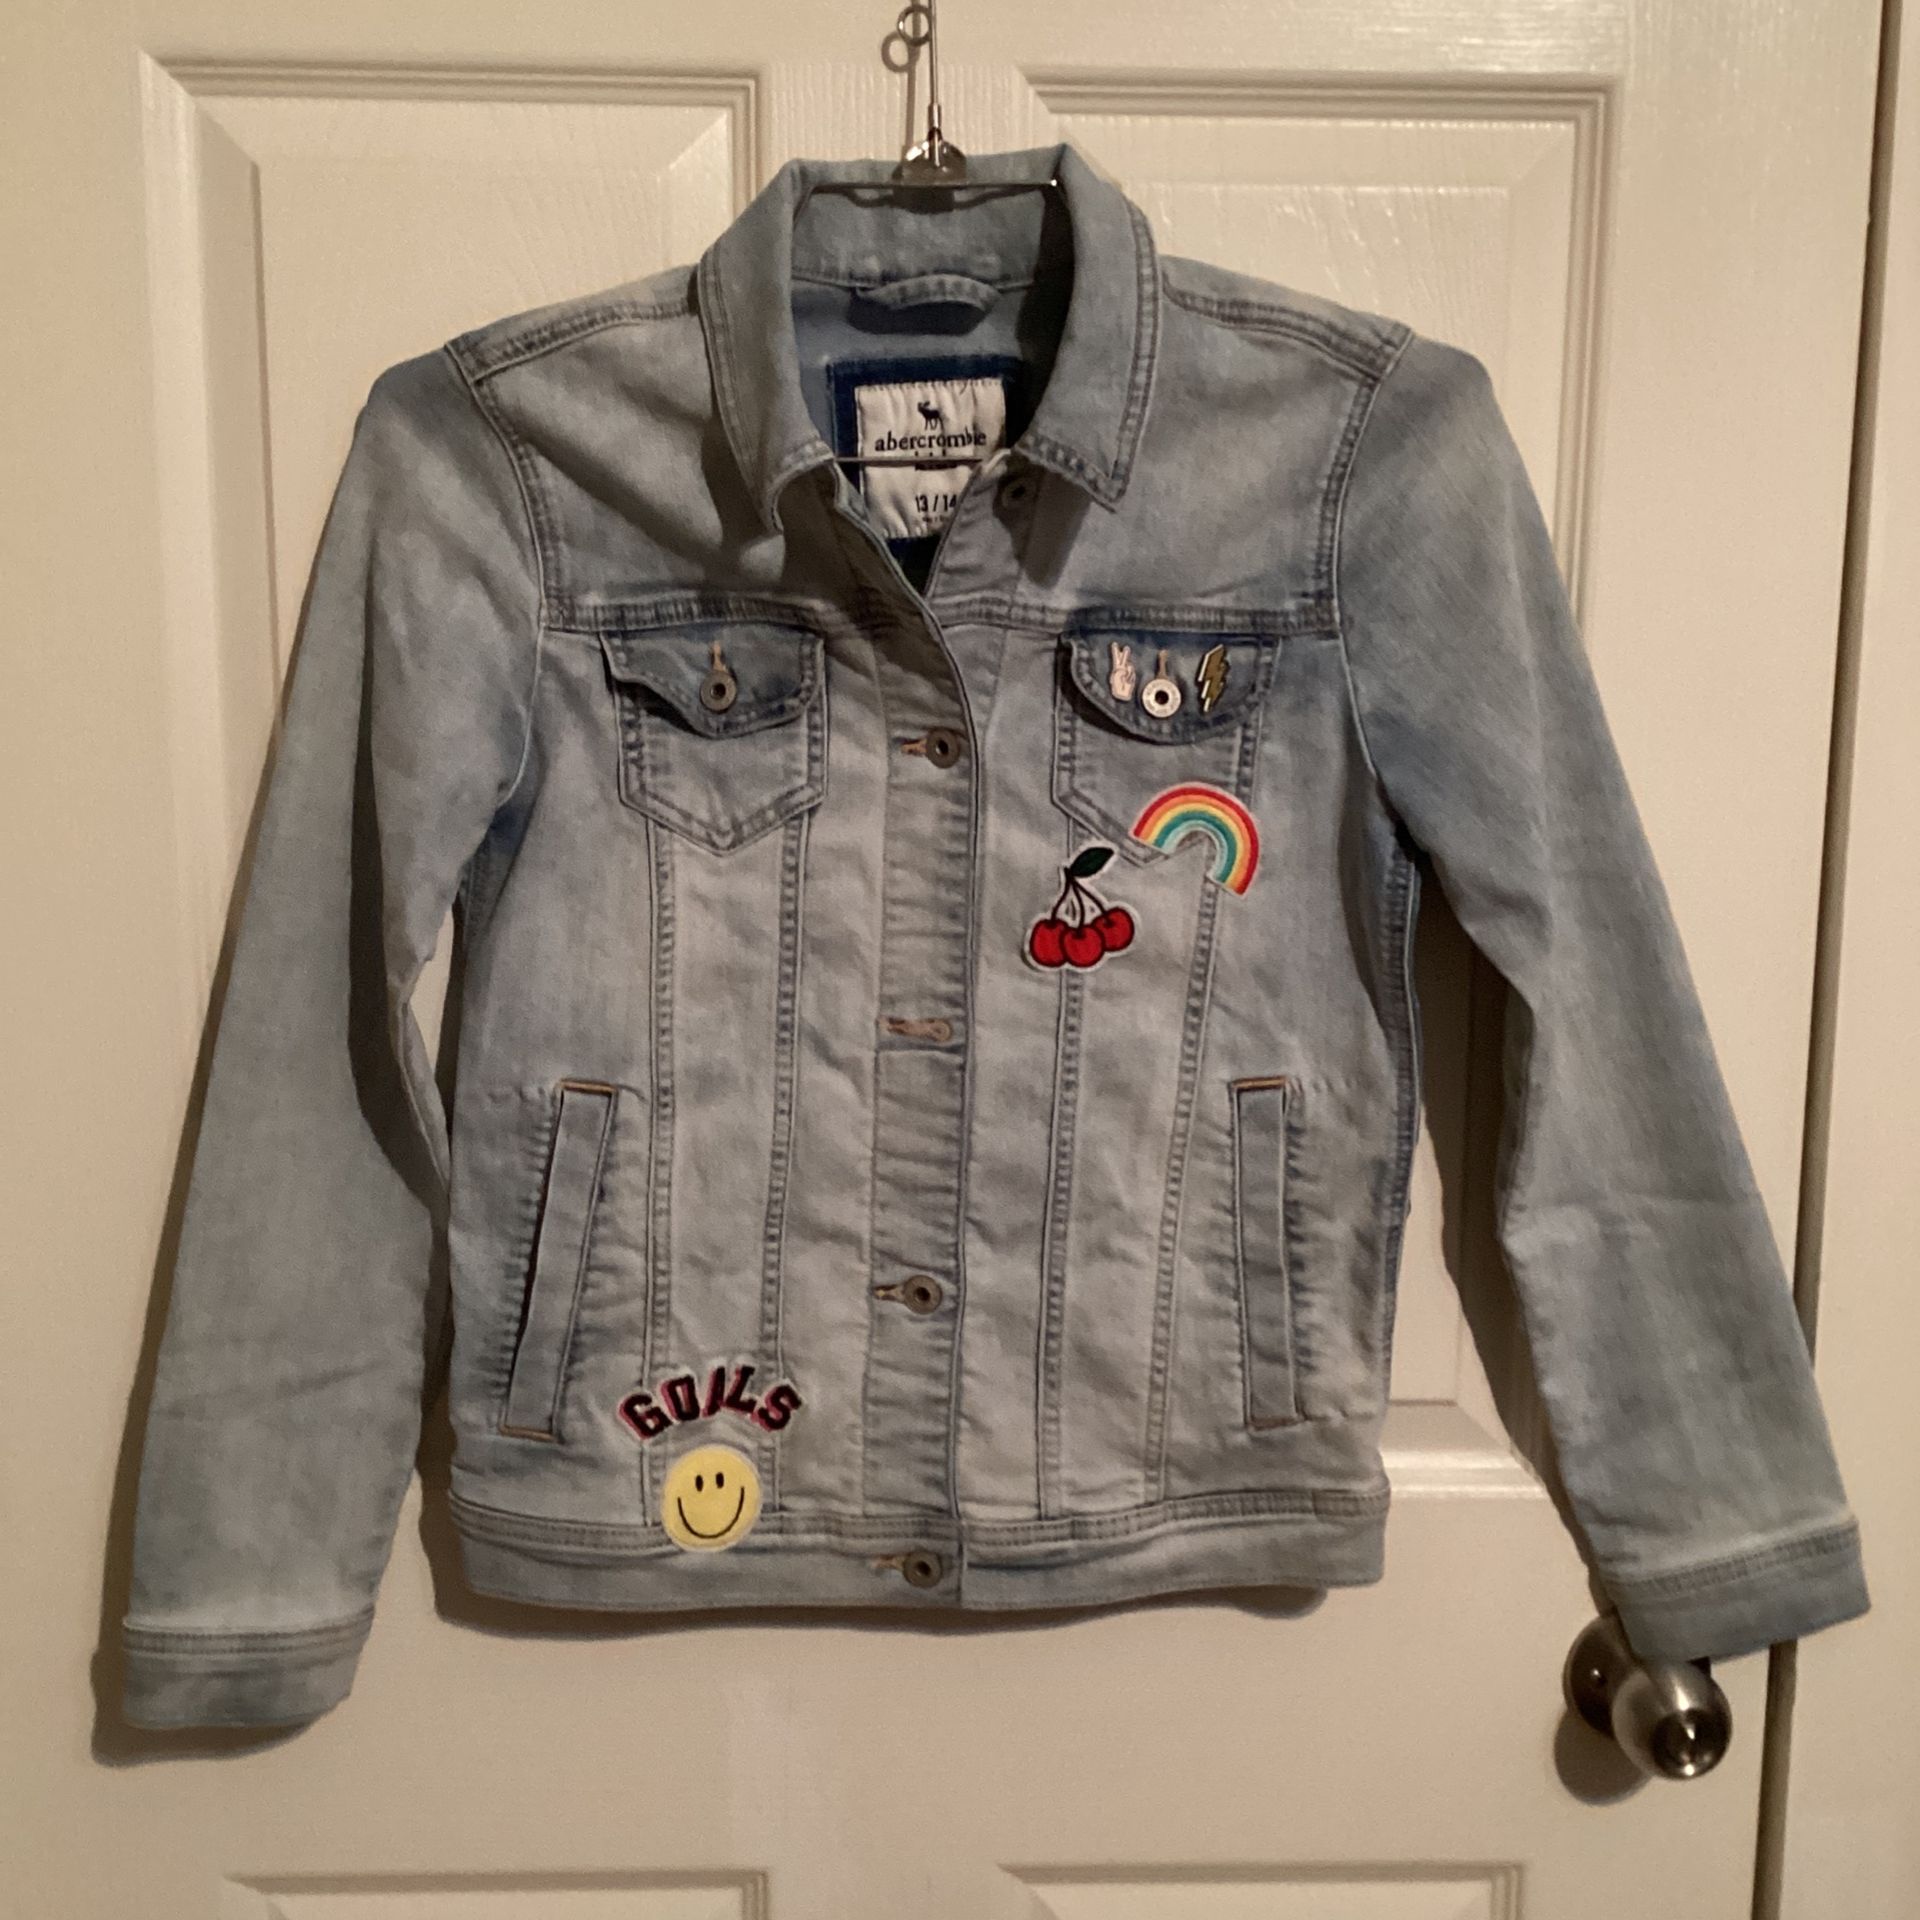 Denim Jacket For Girls Size 13 / 14 With Patches And Pins No Holes Or Rips 